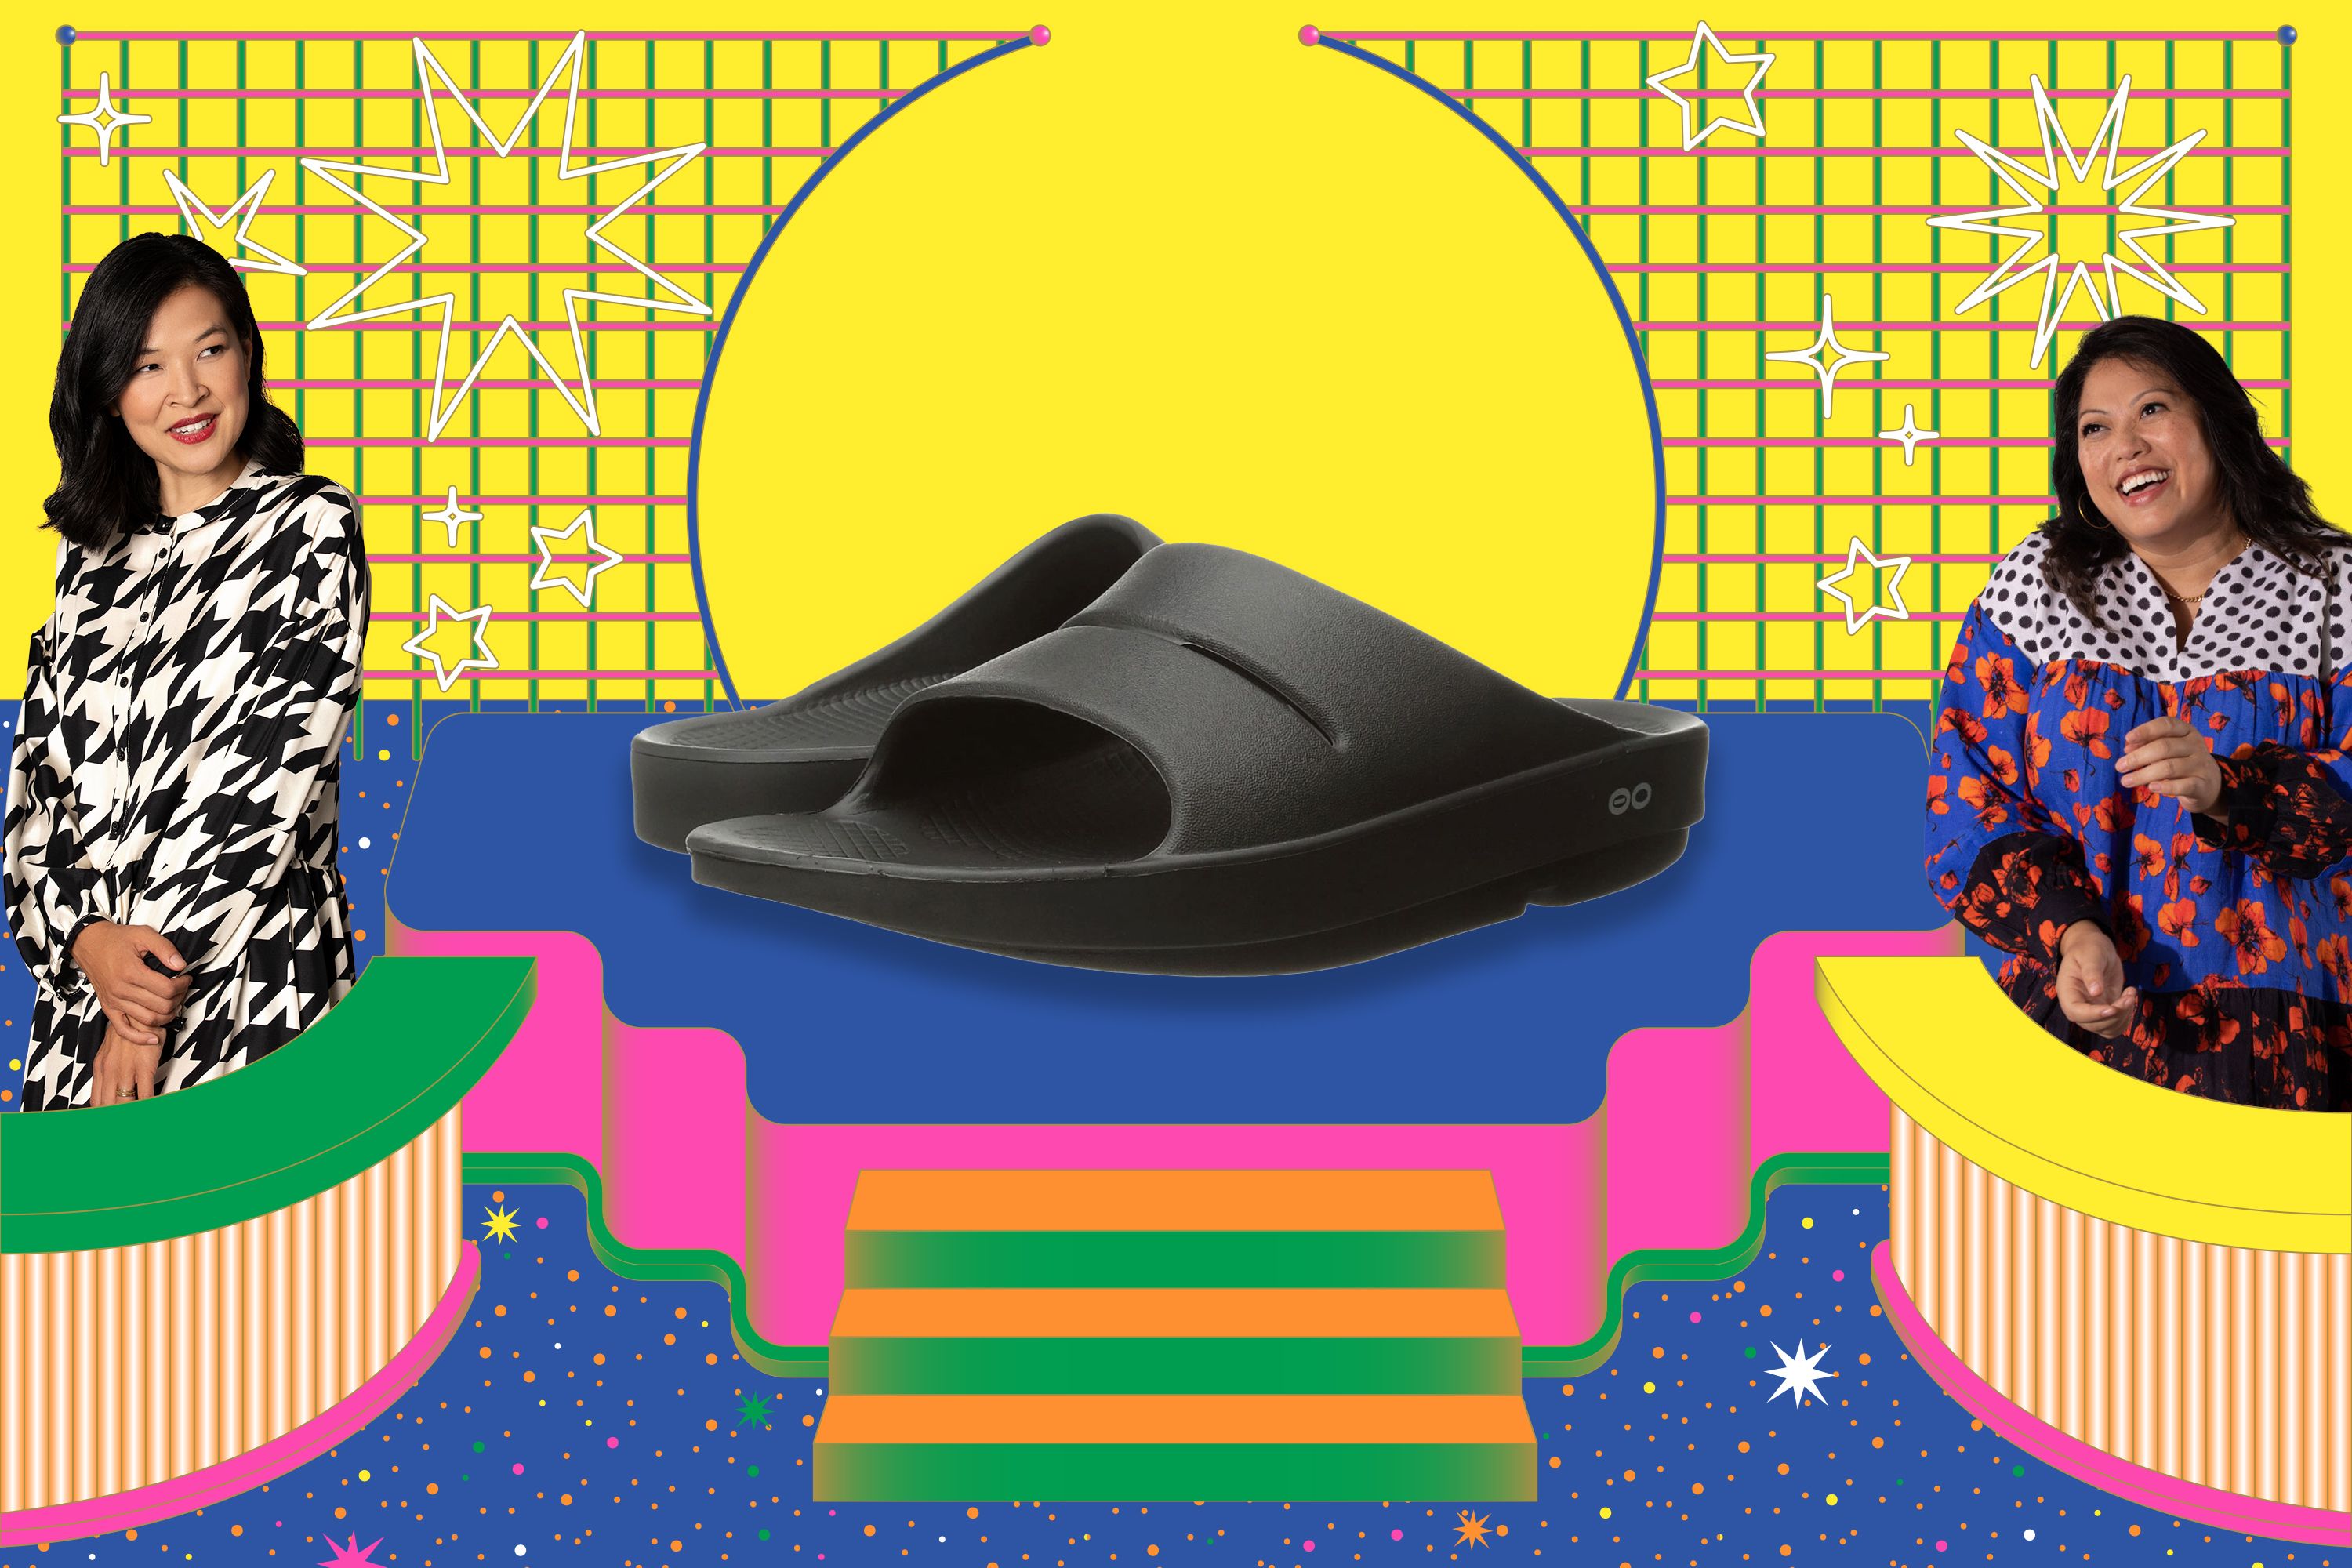 Oofos Ooahh Slide Sandal Review 2022